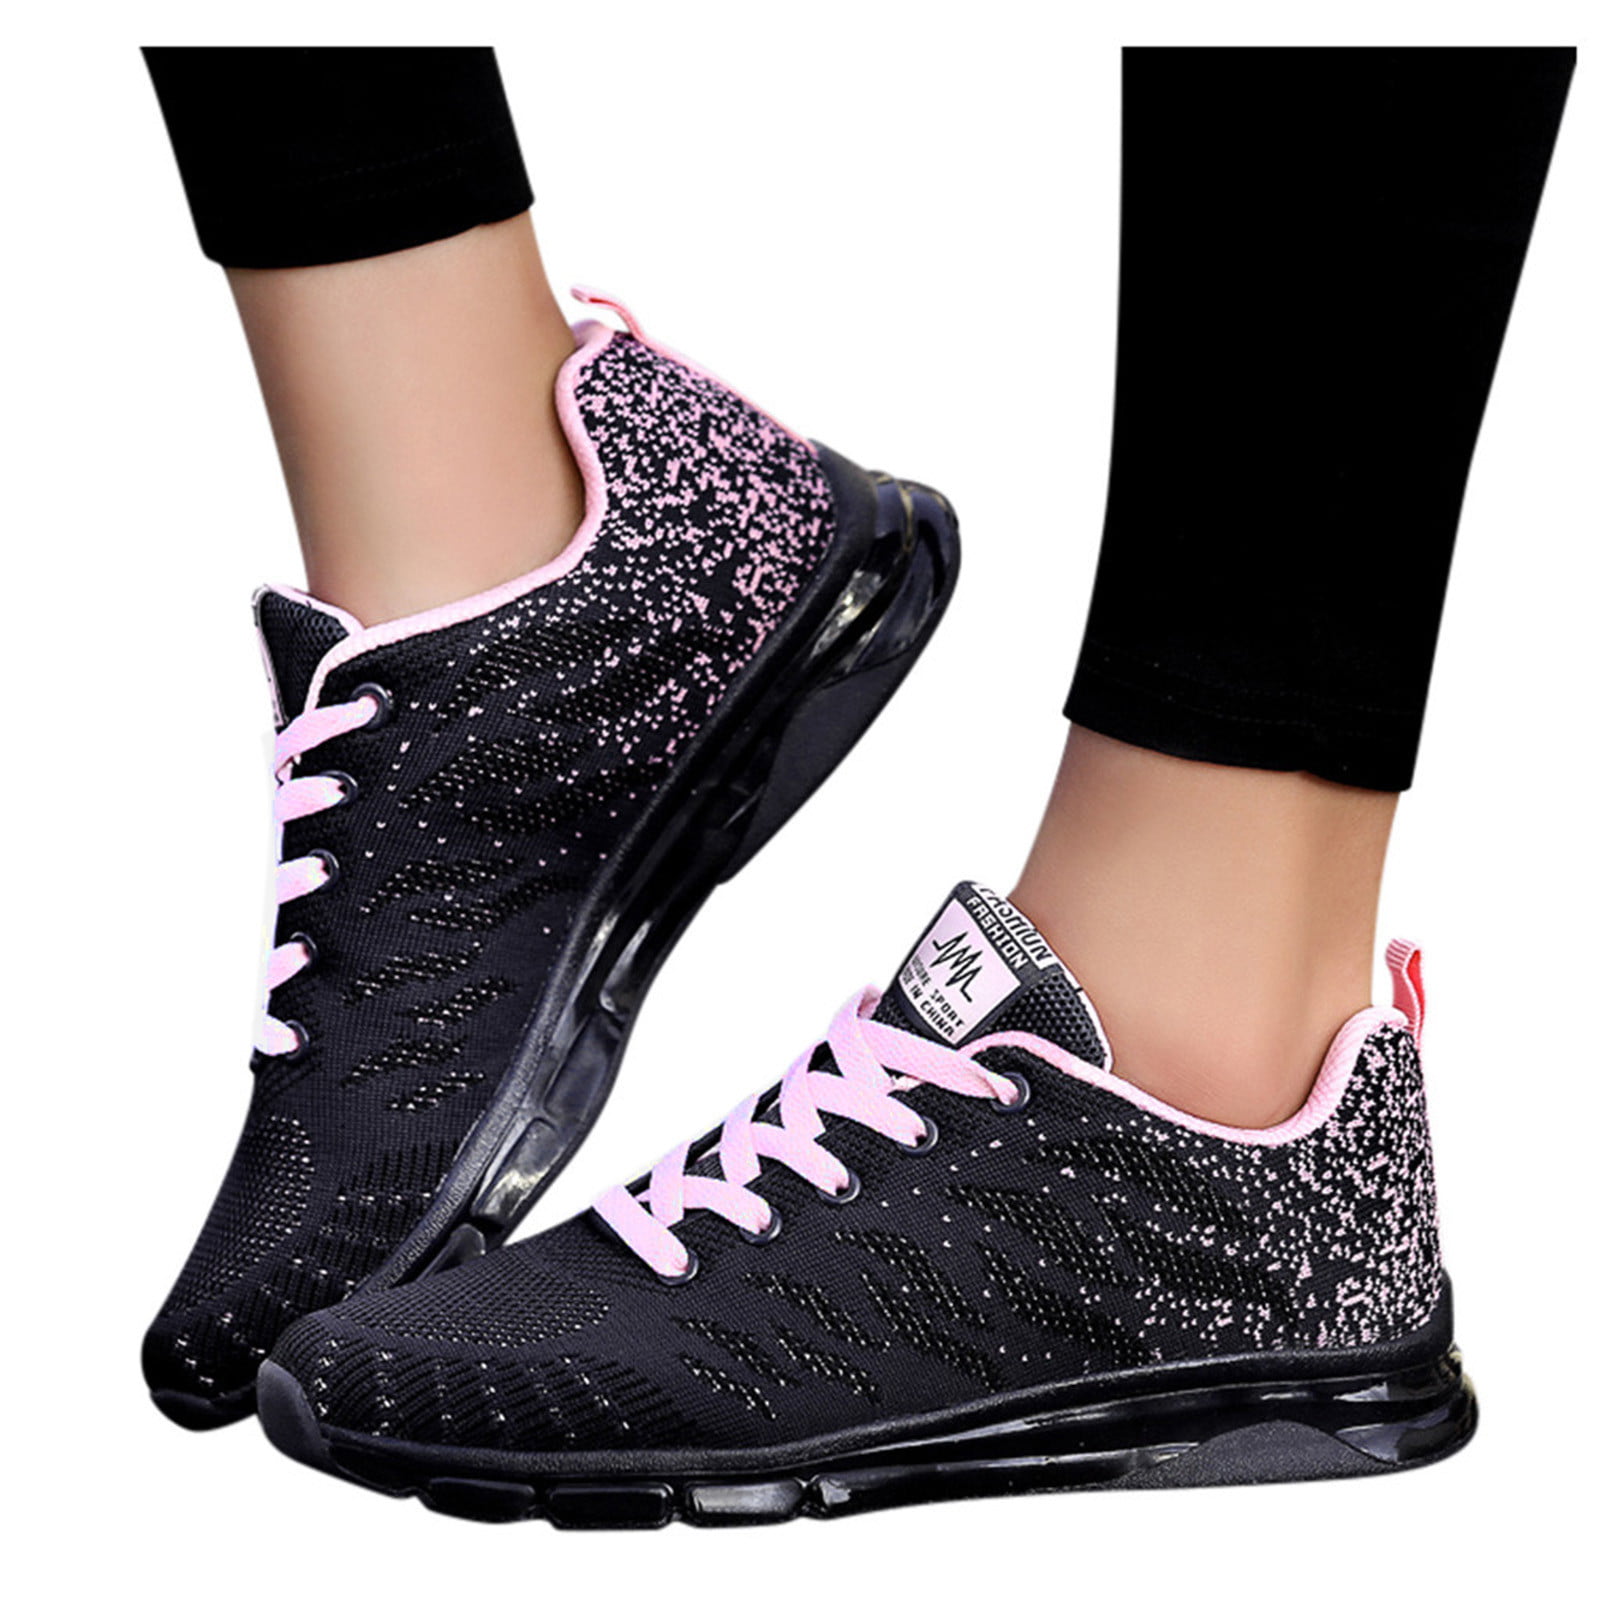 WOMENS SNEAKERS CUSHION BREATHABLE LACE UP CASUAL JOGGING RUNNING ATHLETIC SHOES